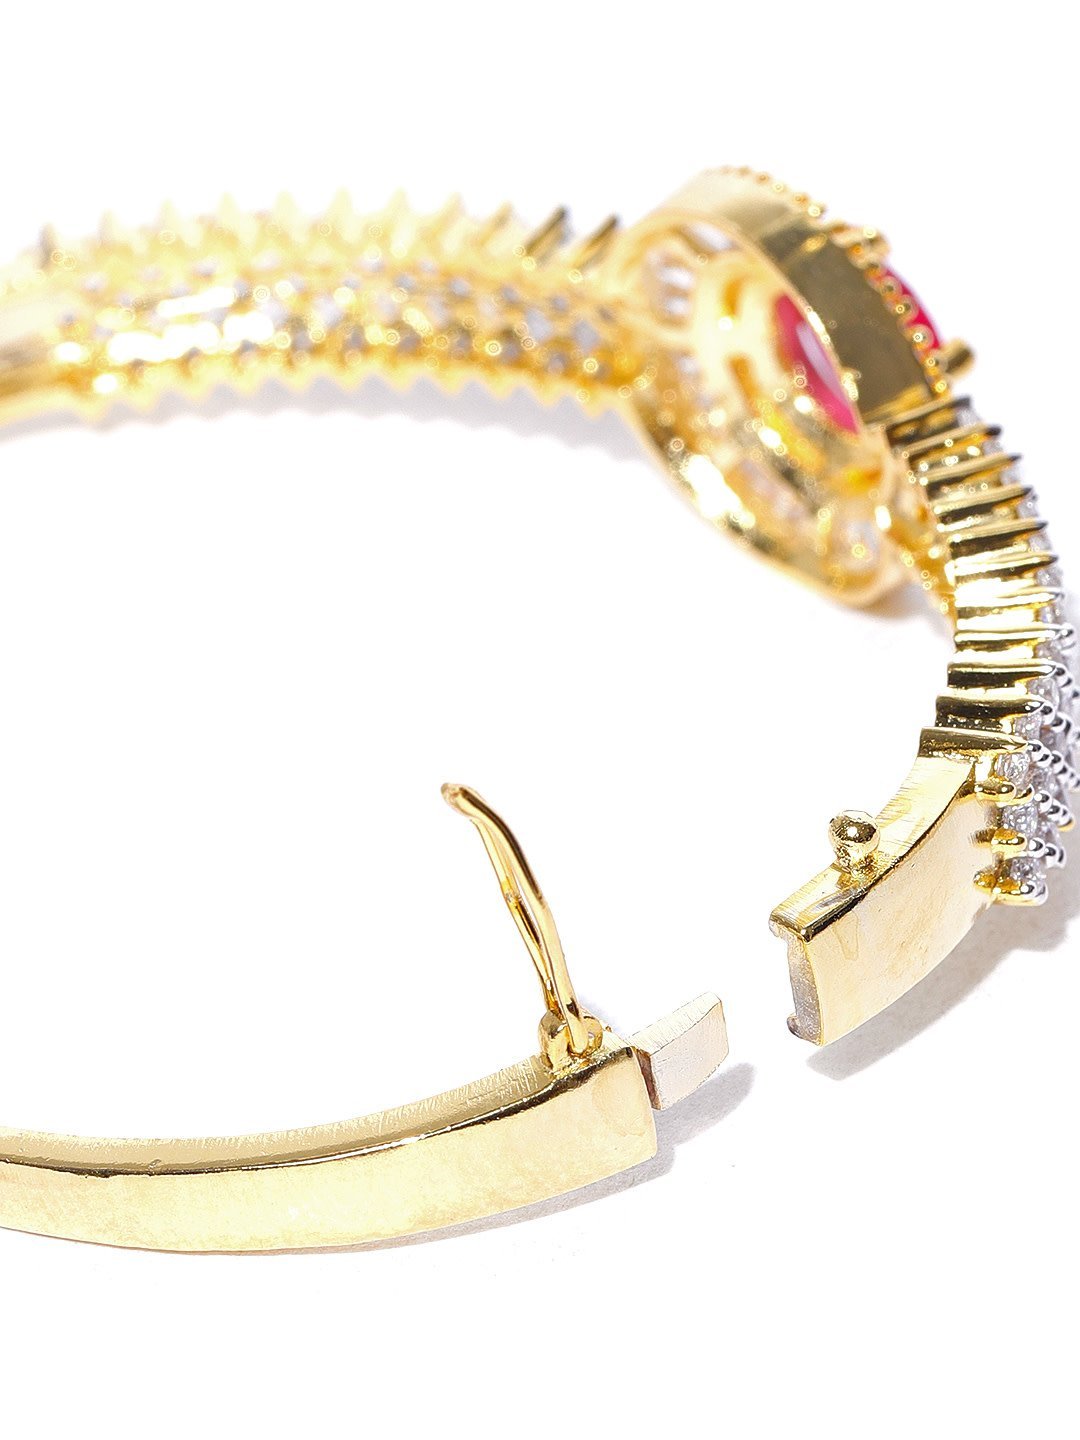 Women's Gold-Plated American Diamond and Ruby Studded Bracelet in Pink Color - Priyaasi